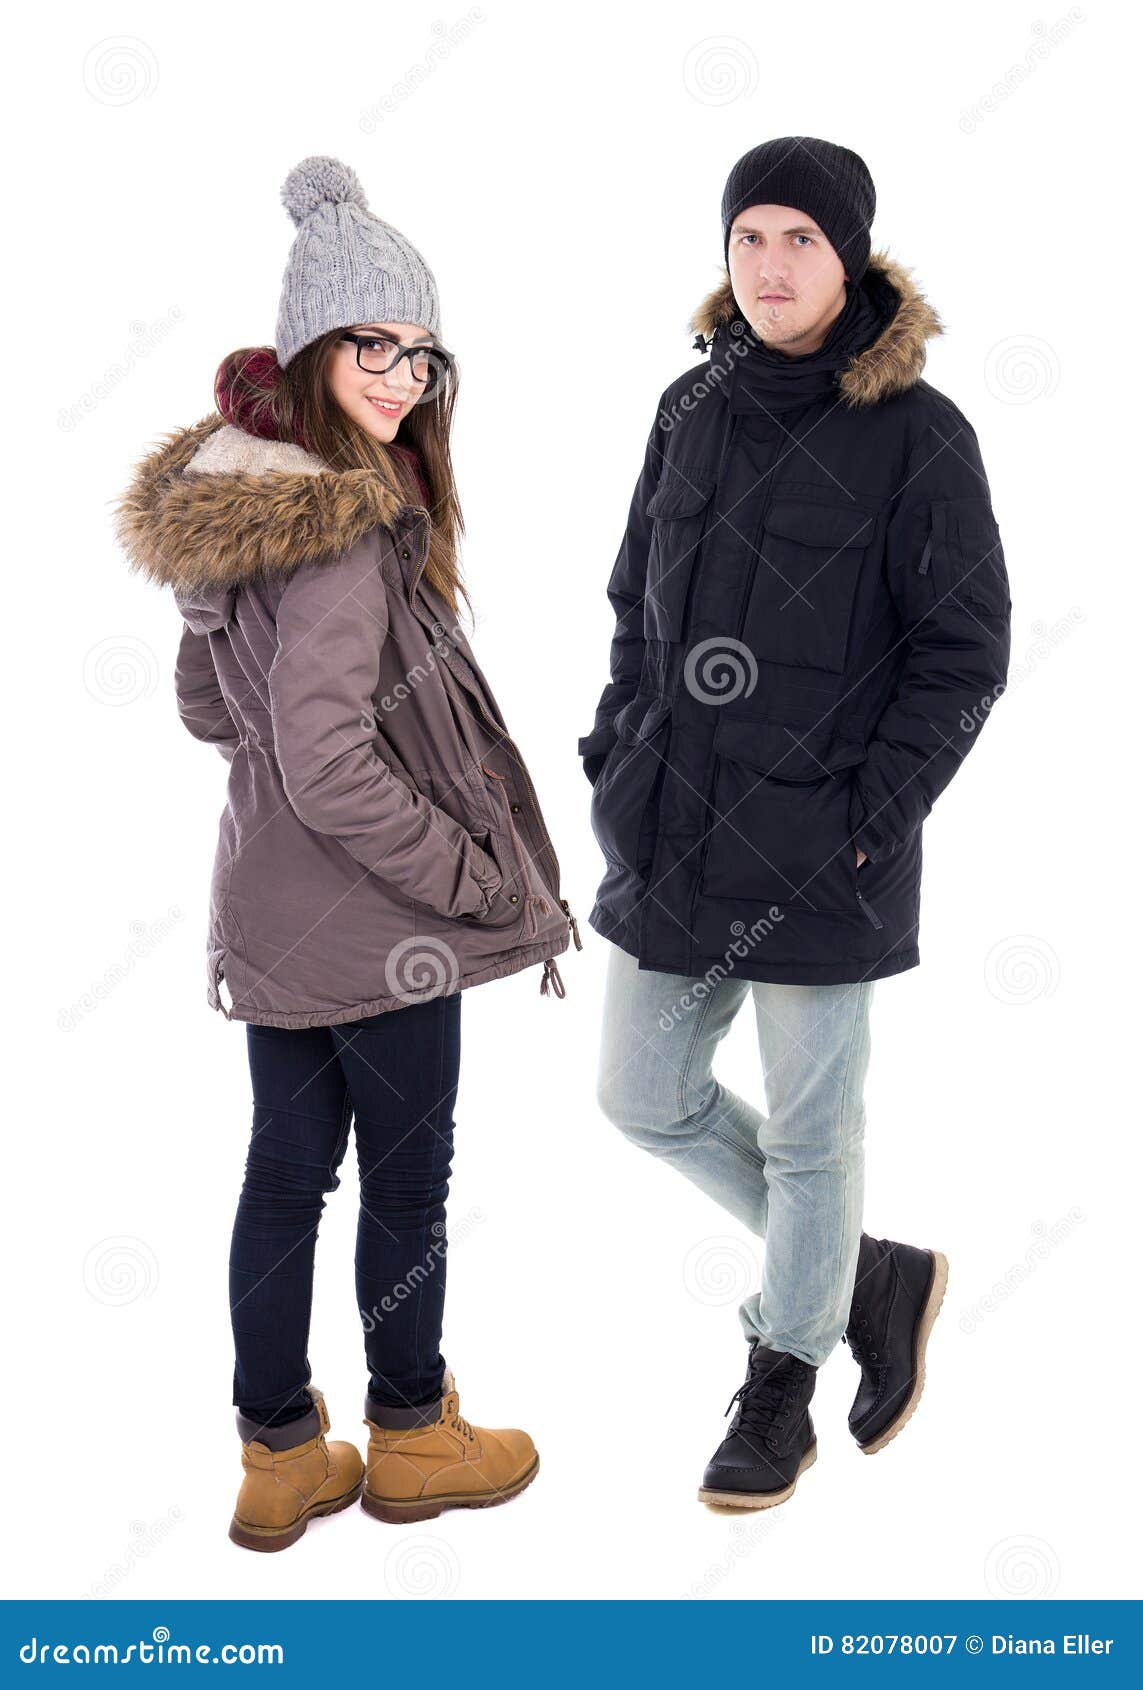 Young Couple in Winter Jackets Isolated on White Stock Image - Image of ...